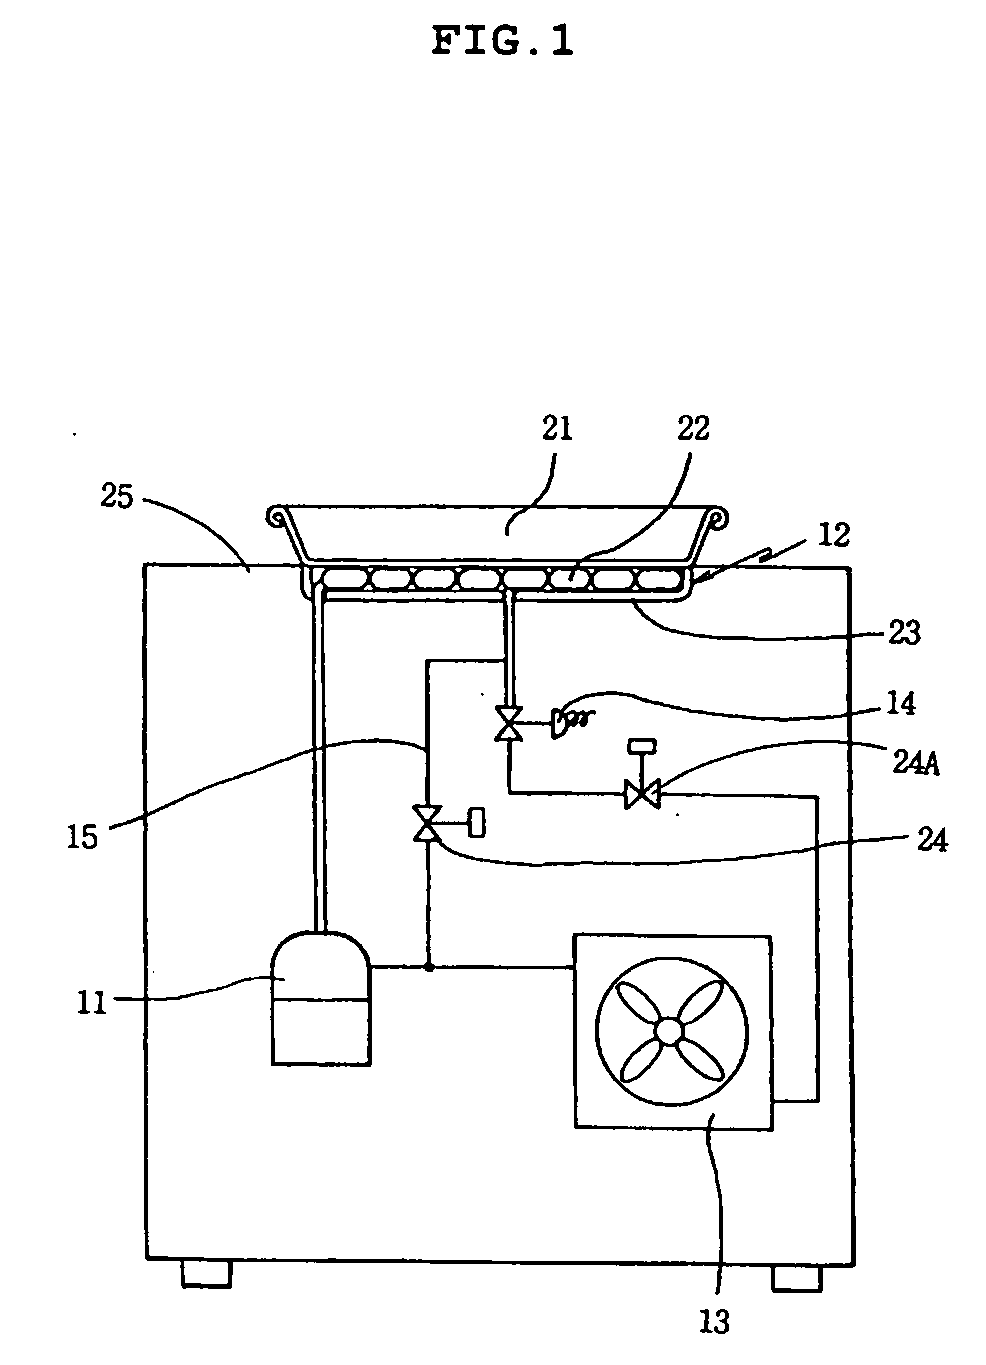 Apparatus for manufacturing ices